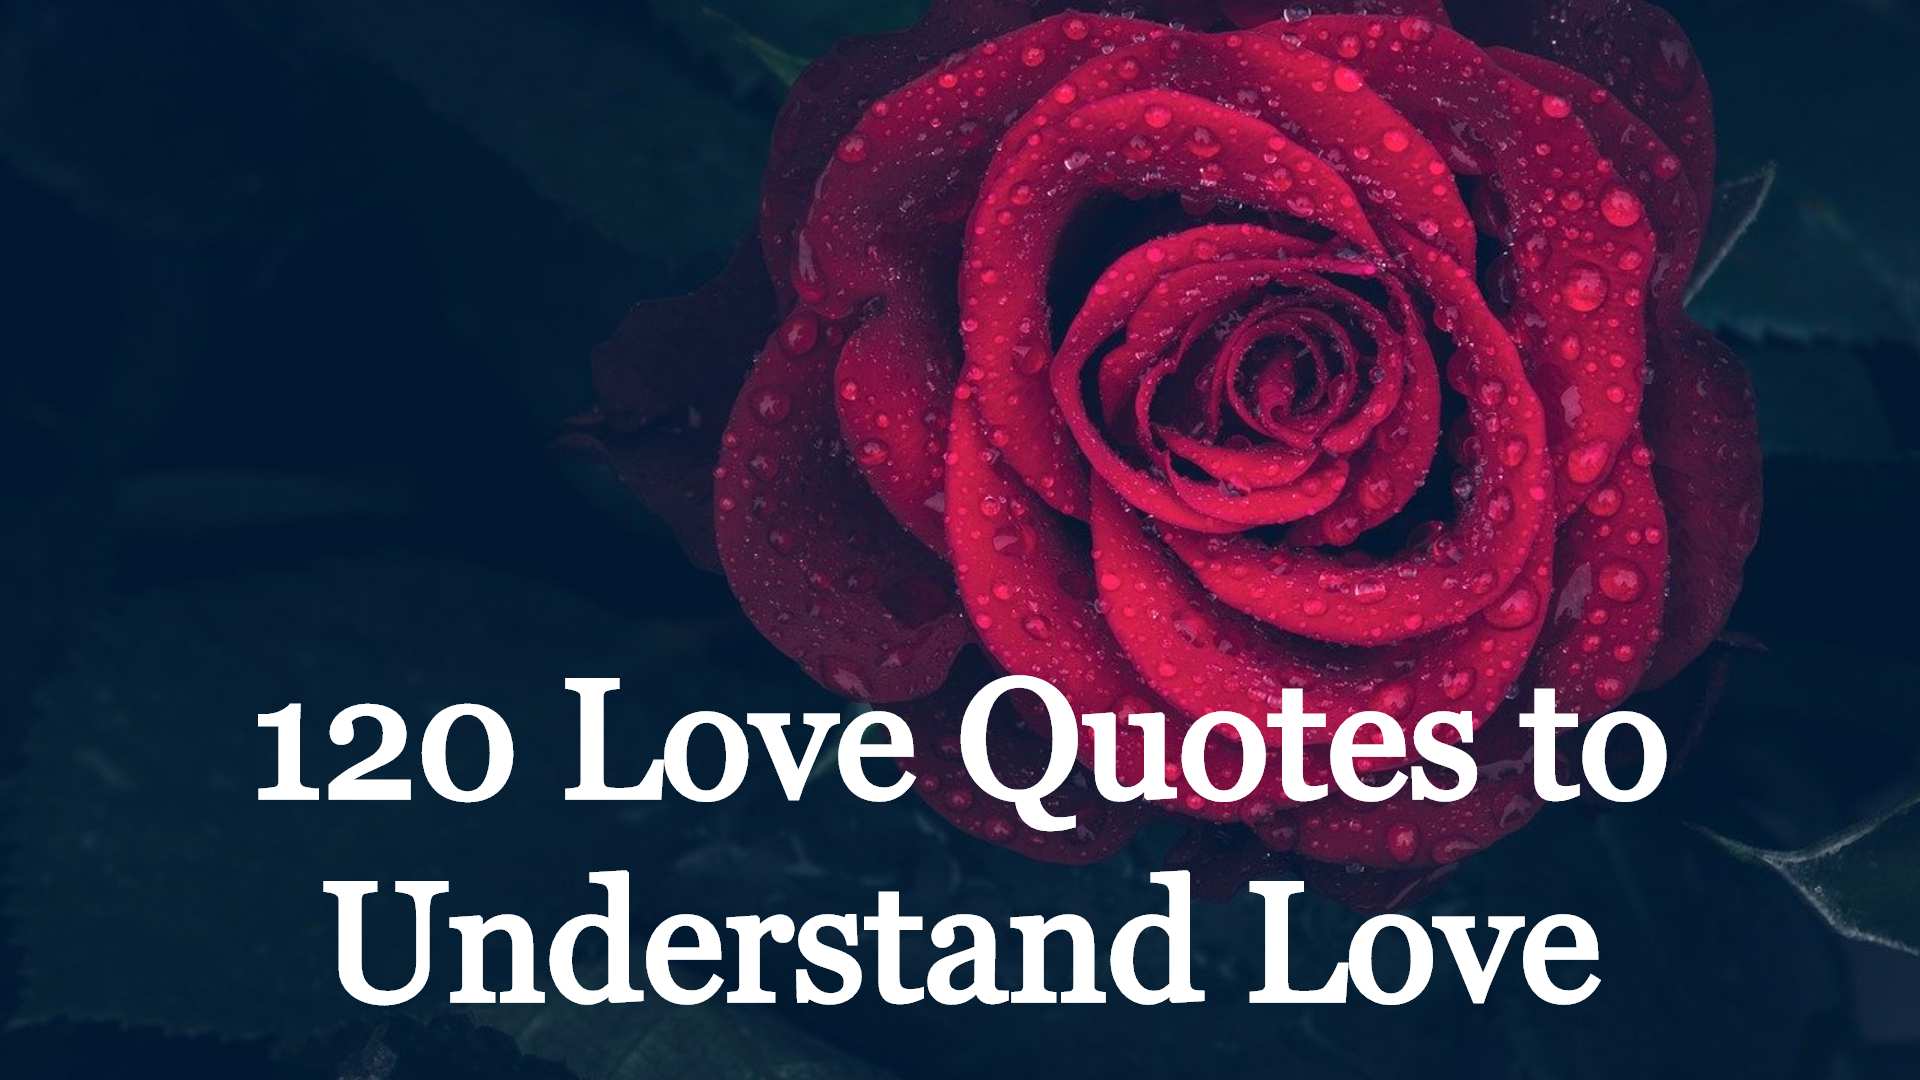 Love Quotes : 120 love quotes to understand love